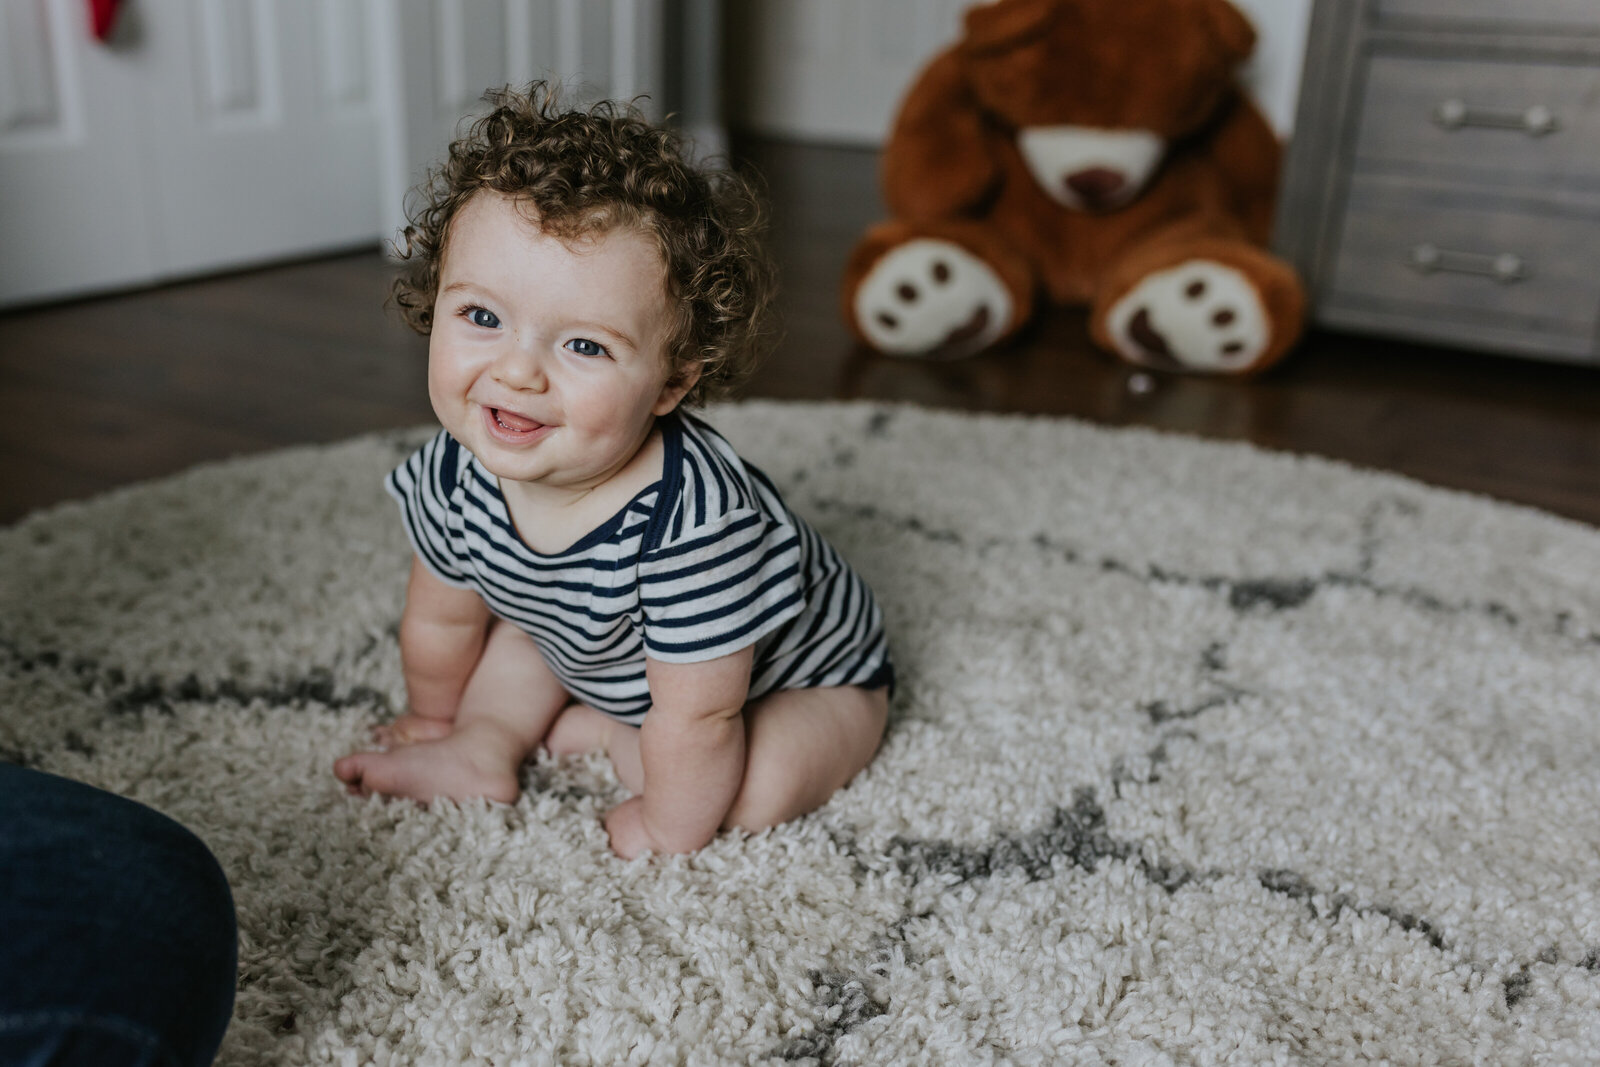 A baby sits on a shag rug and smiles at the camera